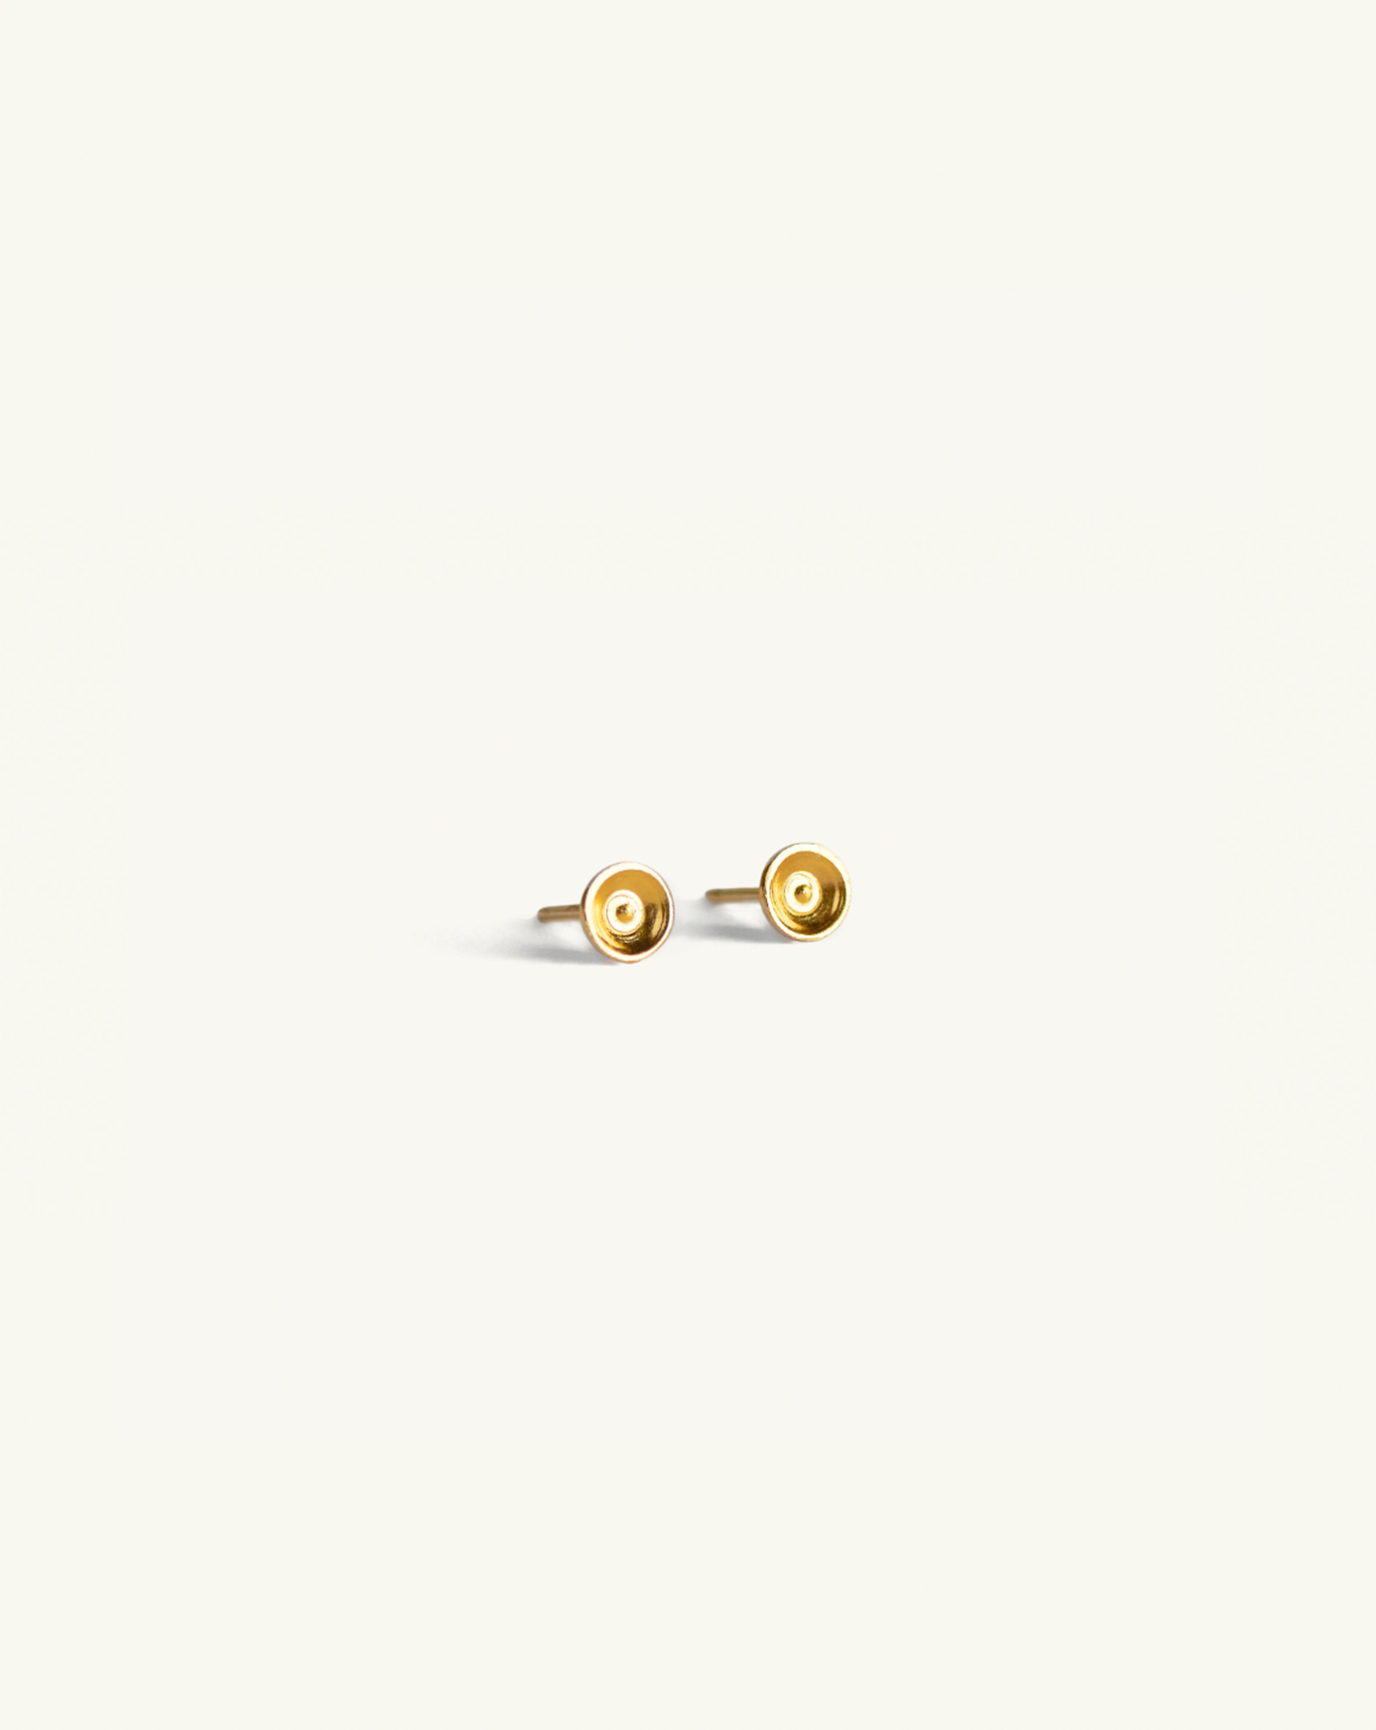 Product image of the small concave gold studs